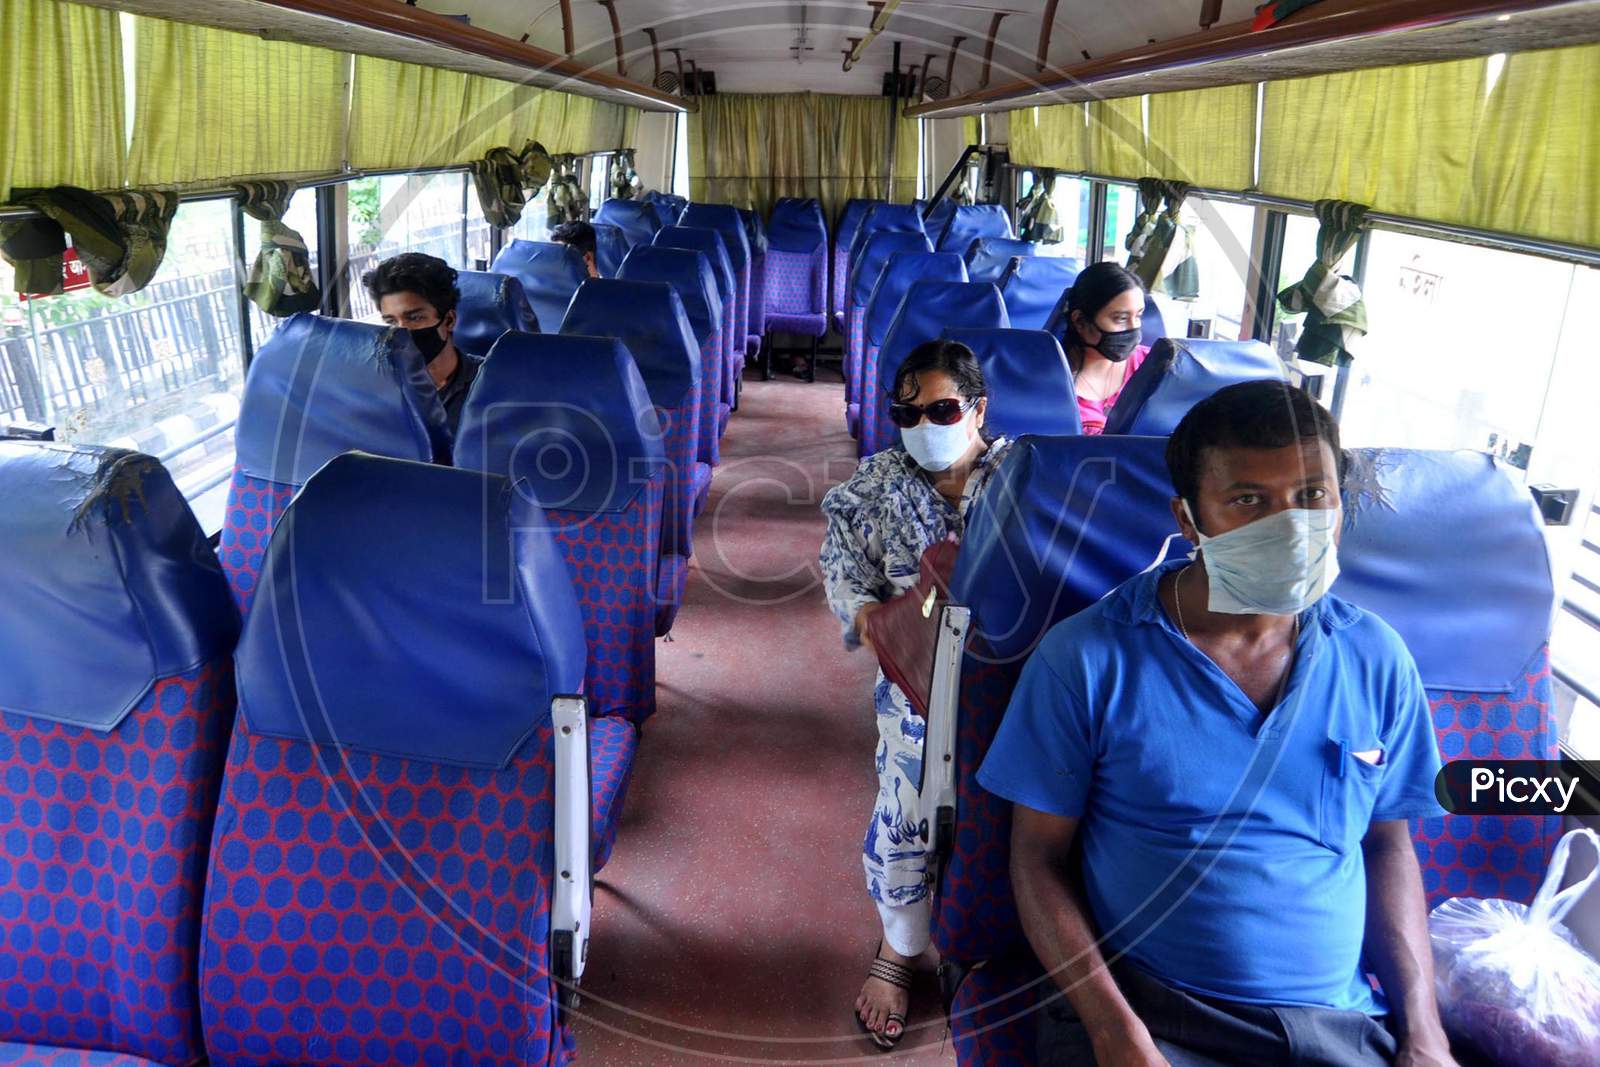 People Maintain Social Distance As They Travel In A City Bus After Authorities Eased Restrictions, During Nationwide Lockdown Amidst Coronavirus or COVID-19 Pandemic  In Guwahati District Of Assam,India